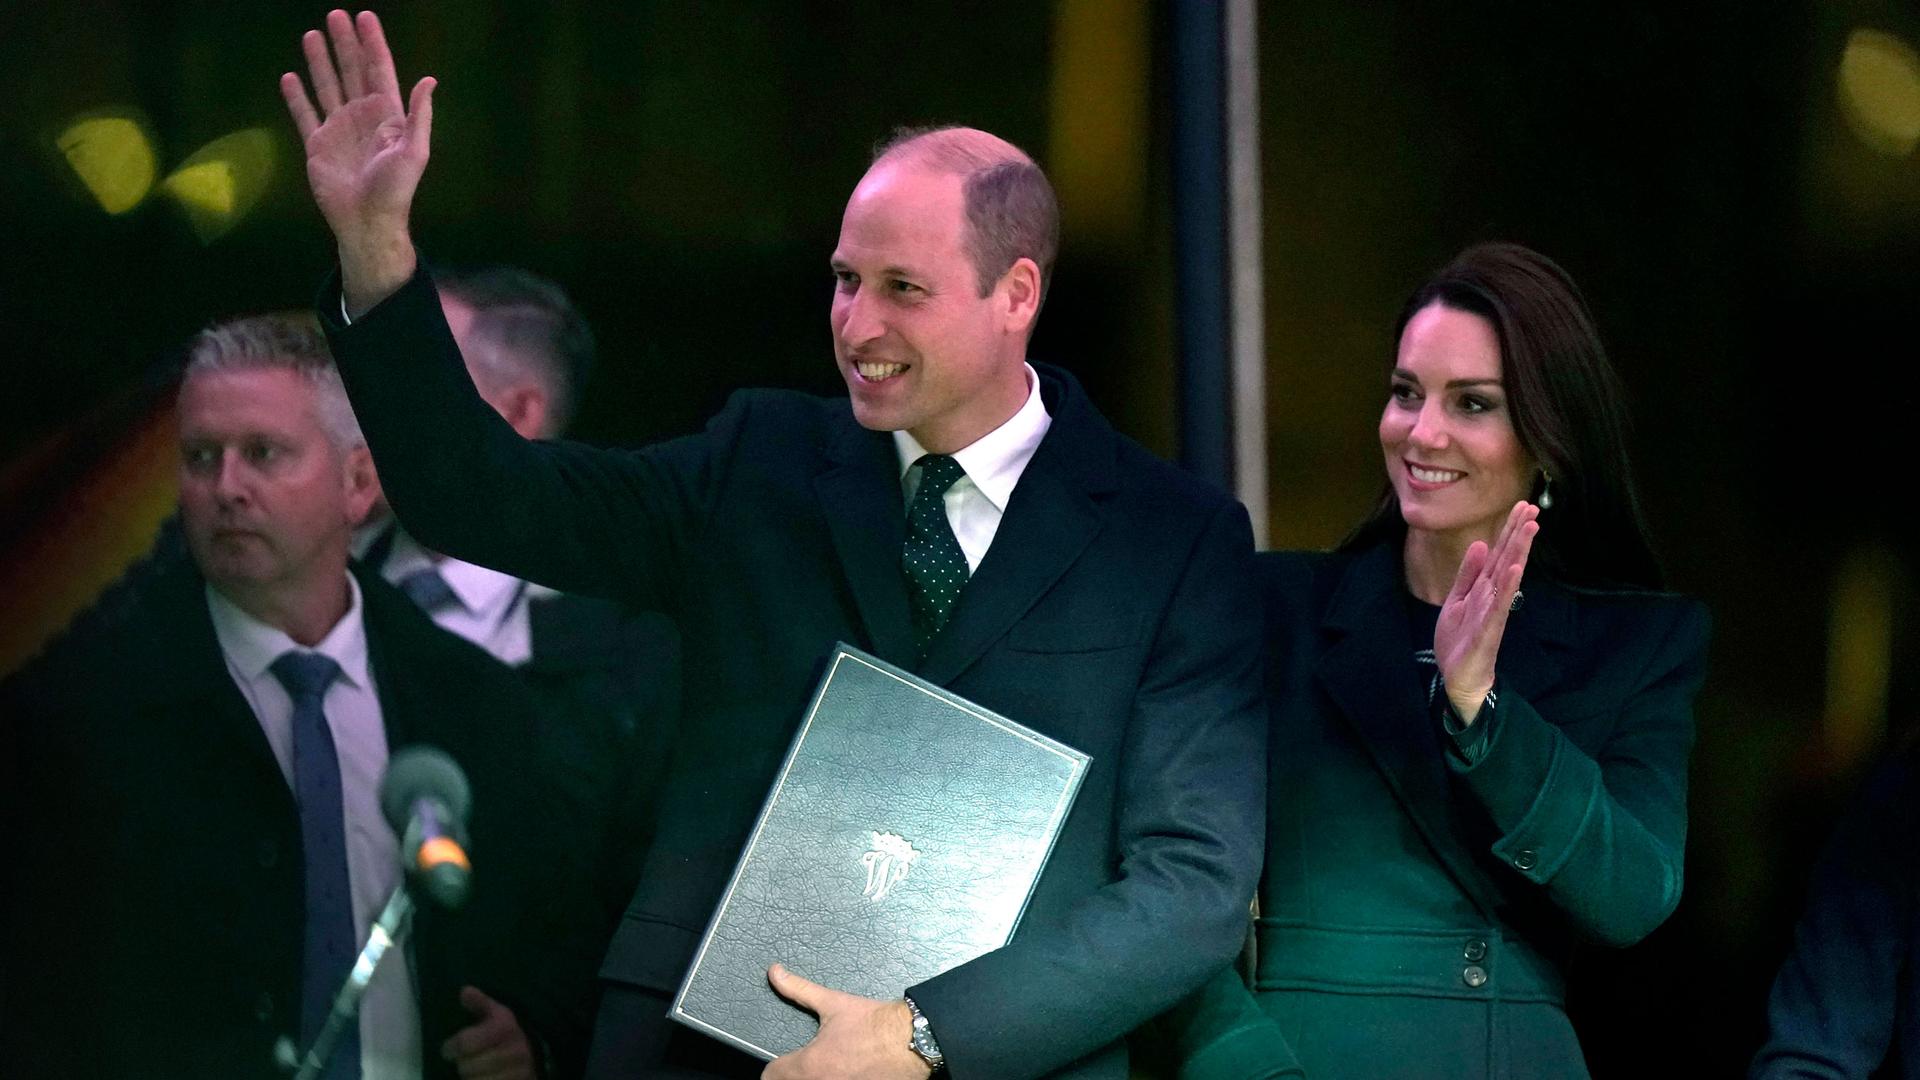 Britain's Prince William and Kate, Princess of Wales, wave to an audience as they take to the stage during ceremonies, Wednesday, Nov. 30, 2022, in Boston.